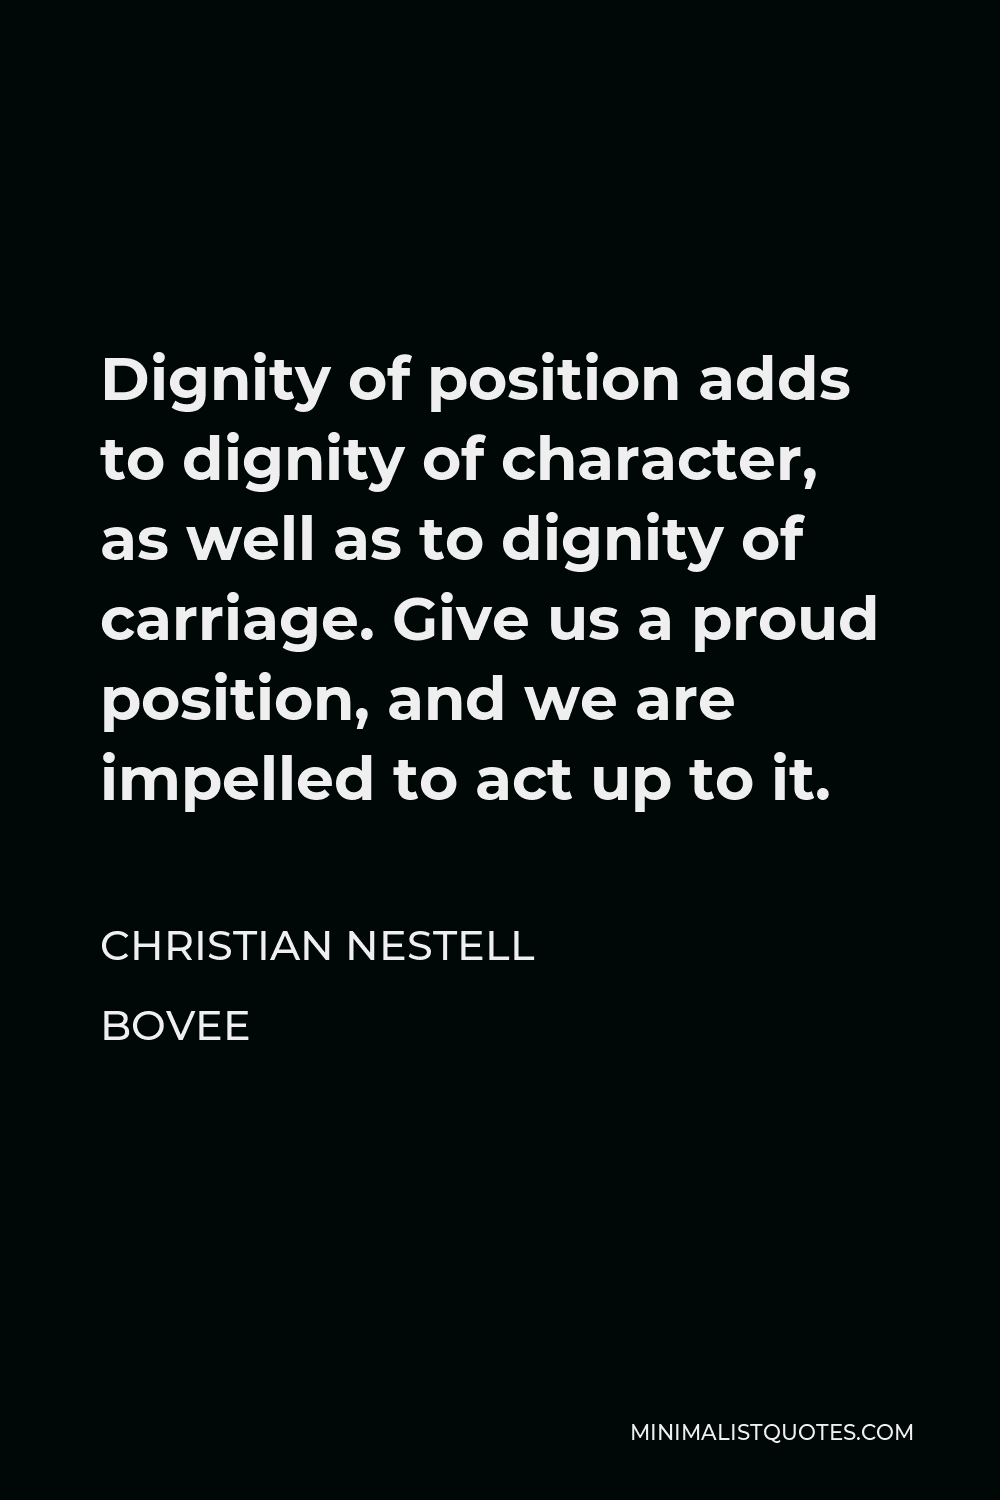 Christian Nestell Bovee Quote - Dignity of position adds to dignity of character, as well as to dignity of carriage. Give us a proud position, and we are impelled to act up to it.